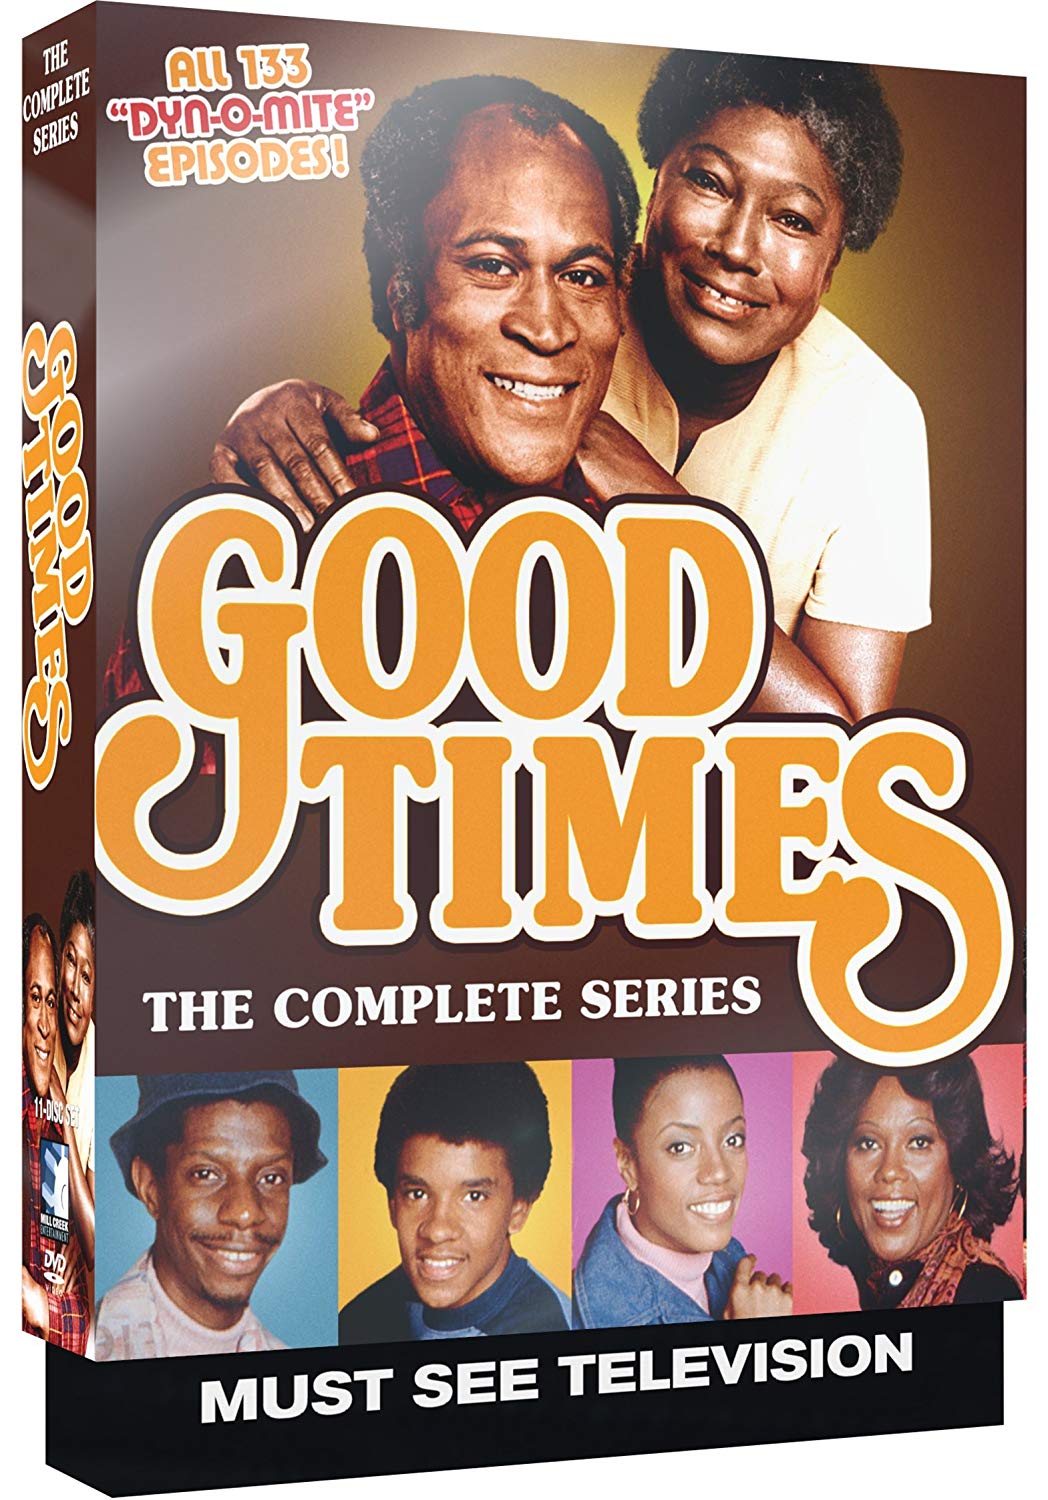 Good Times: The Complete Series (DVD Set) - DVD [ 2018 ]  - Comedy Television On DVD - TV Shows On GRUV